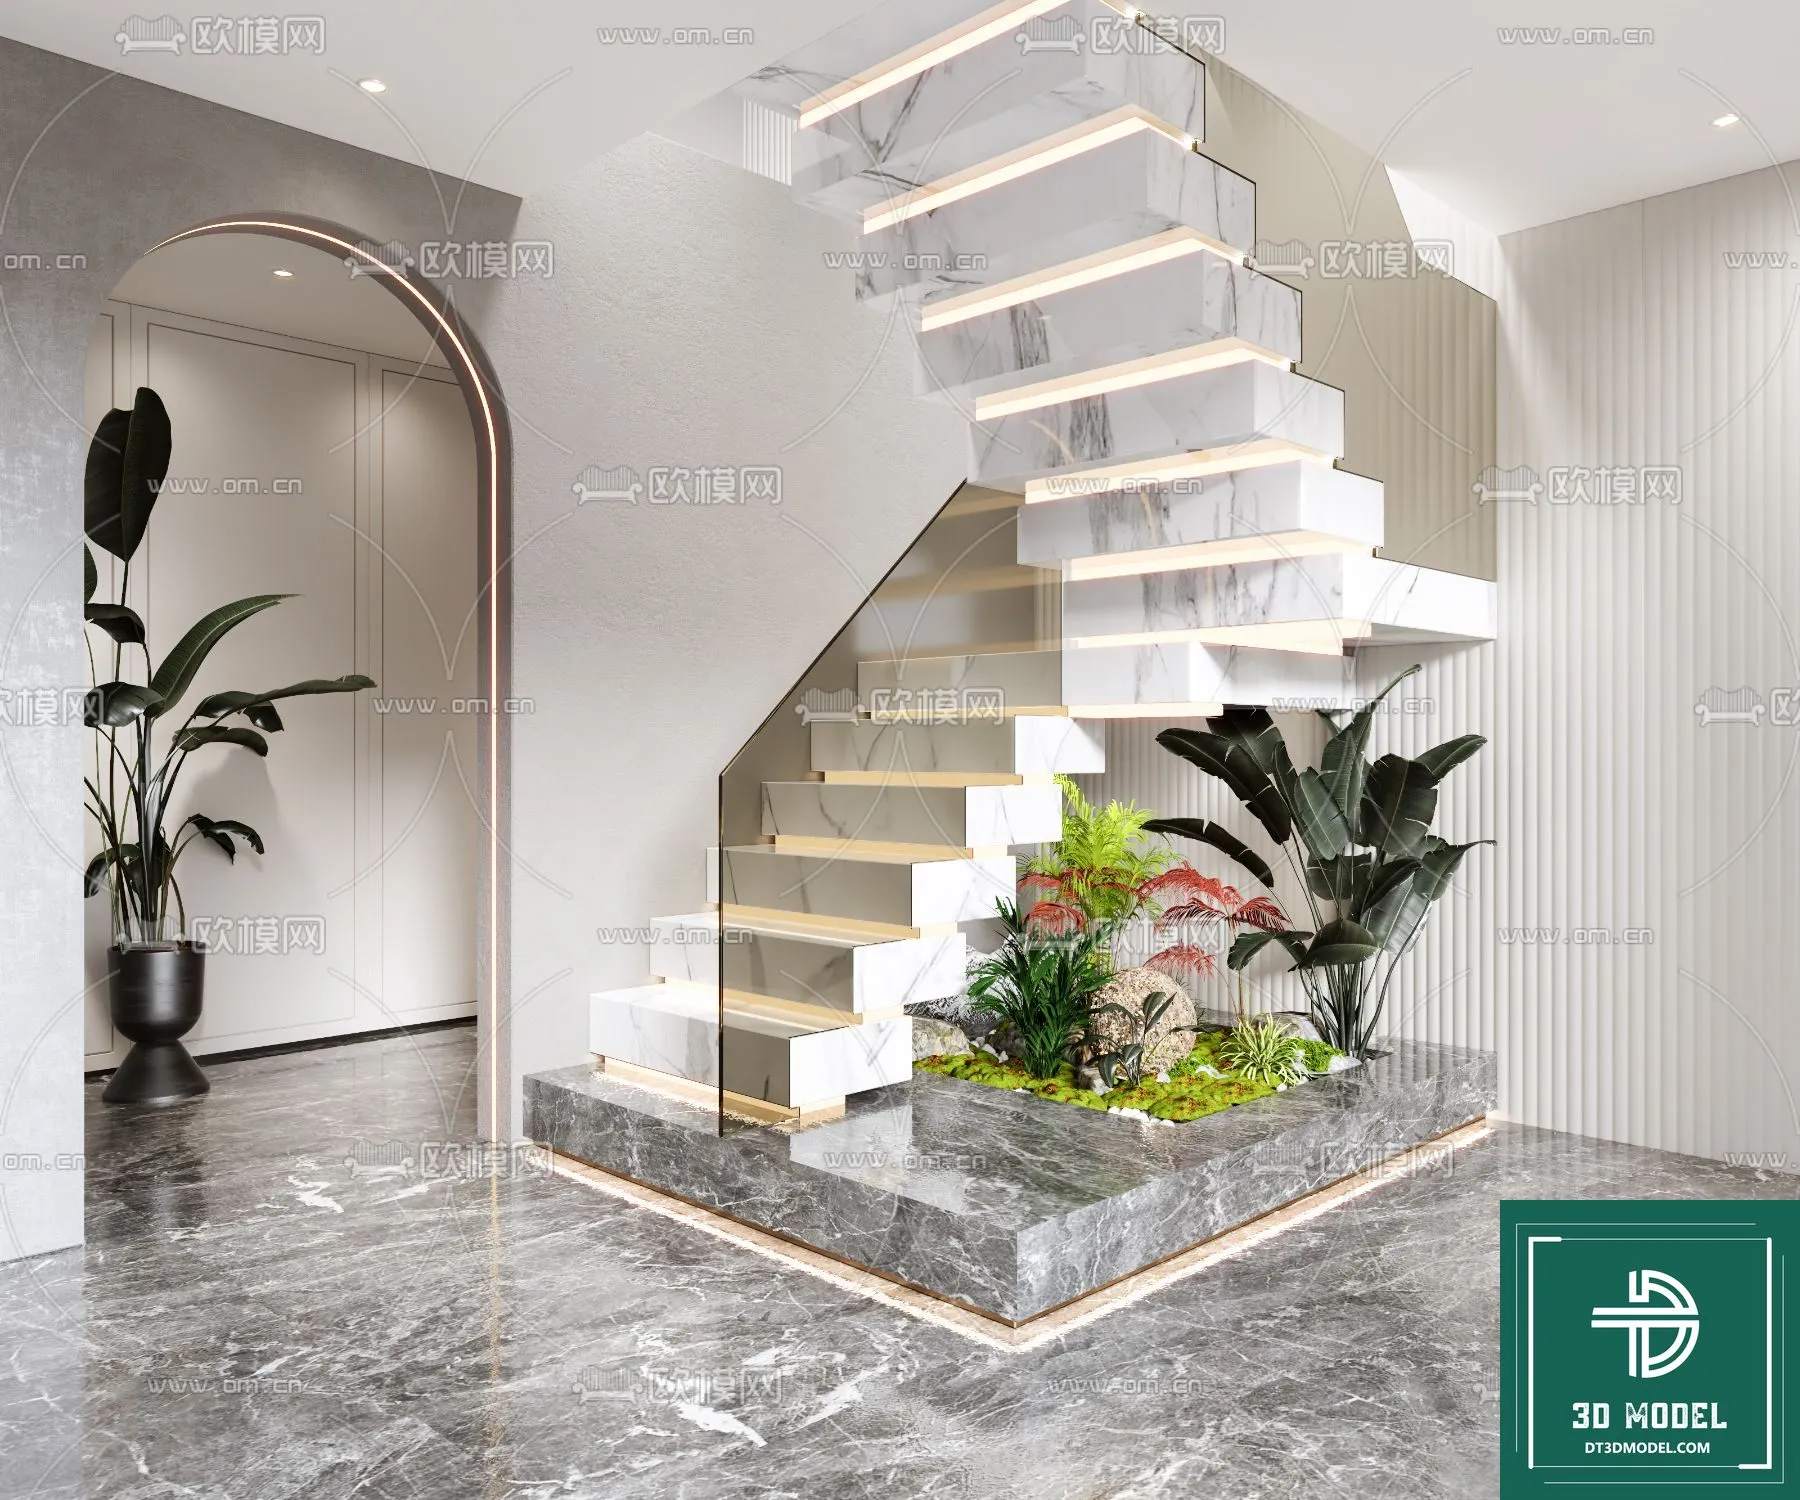 STAIR – 3DS MAX MODELS – 032 – PRO